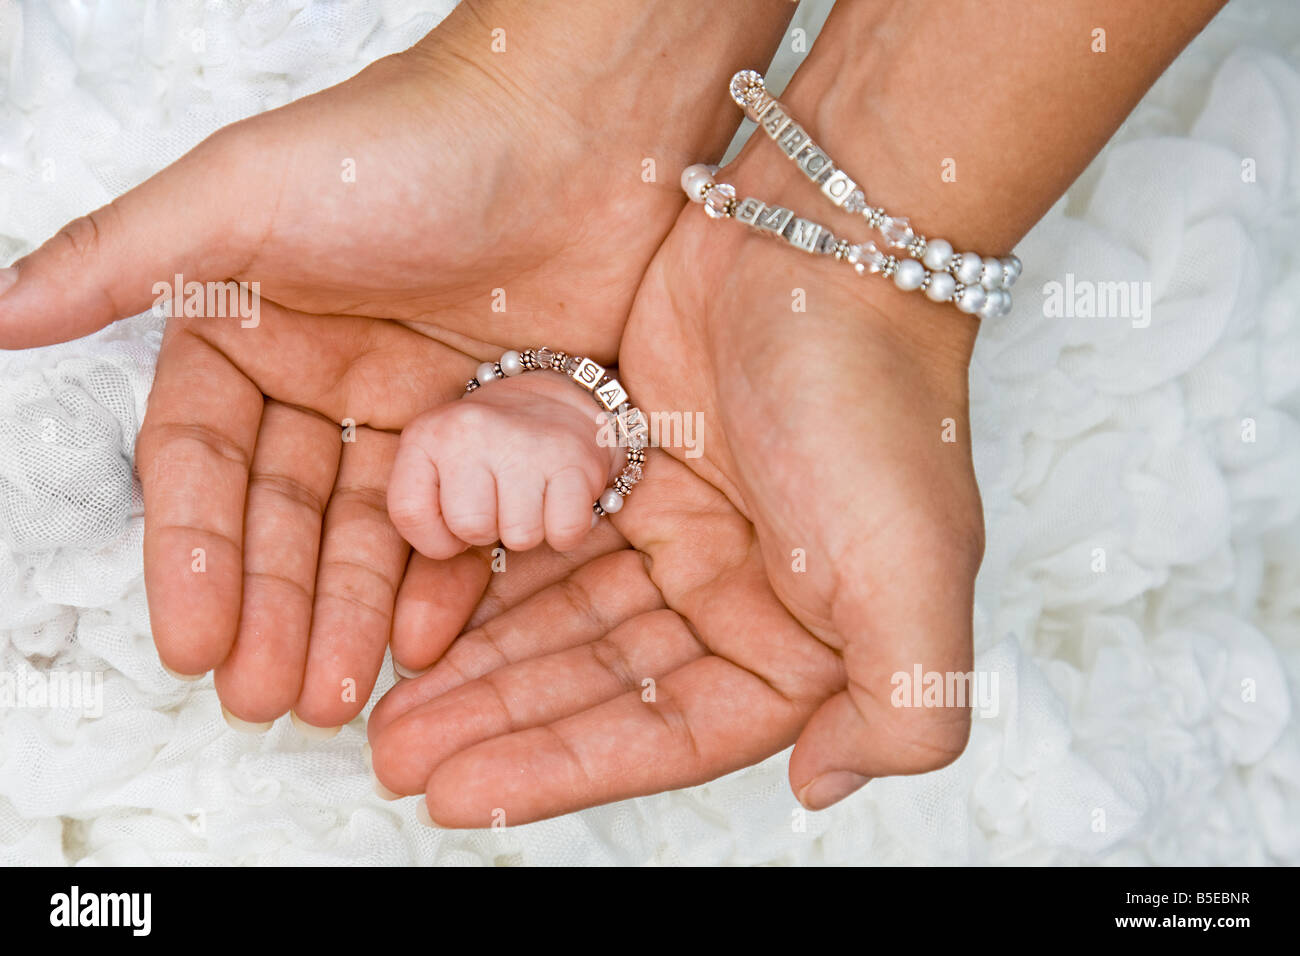 Cute small baby hand inside 2 female adult hands with bracelets Stock Photo